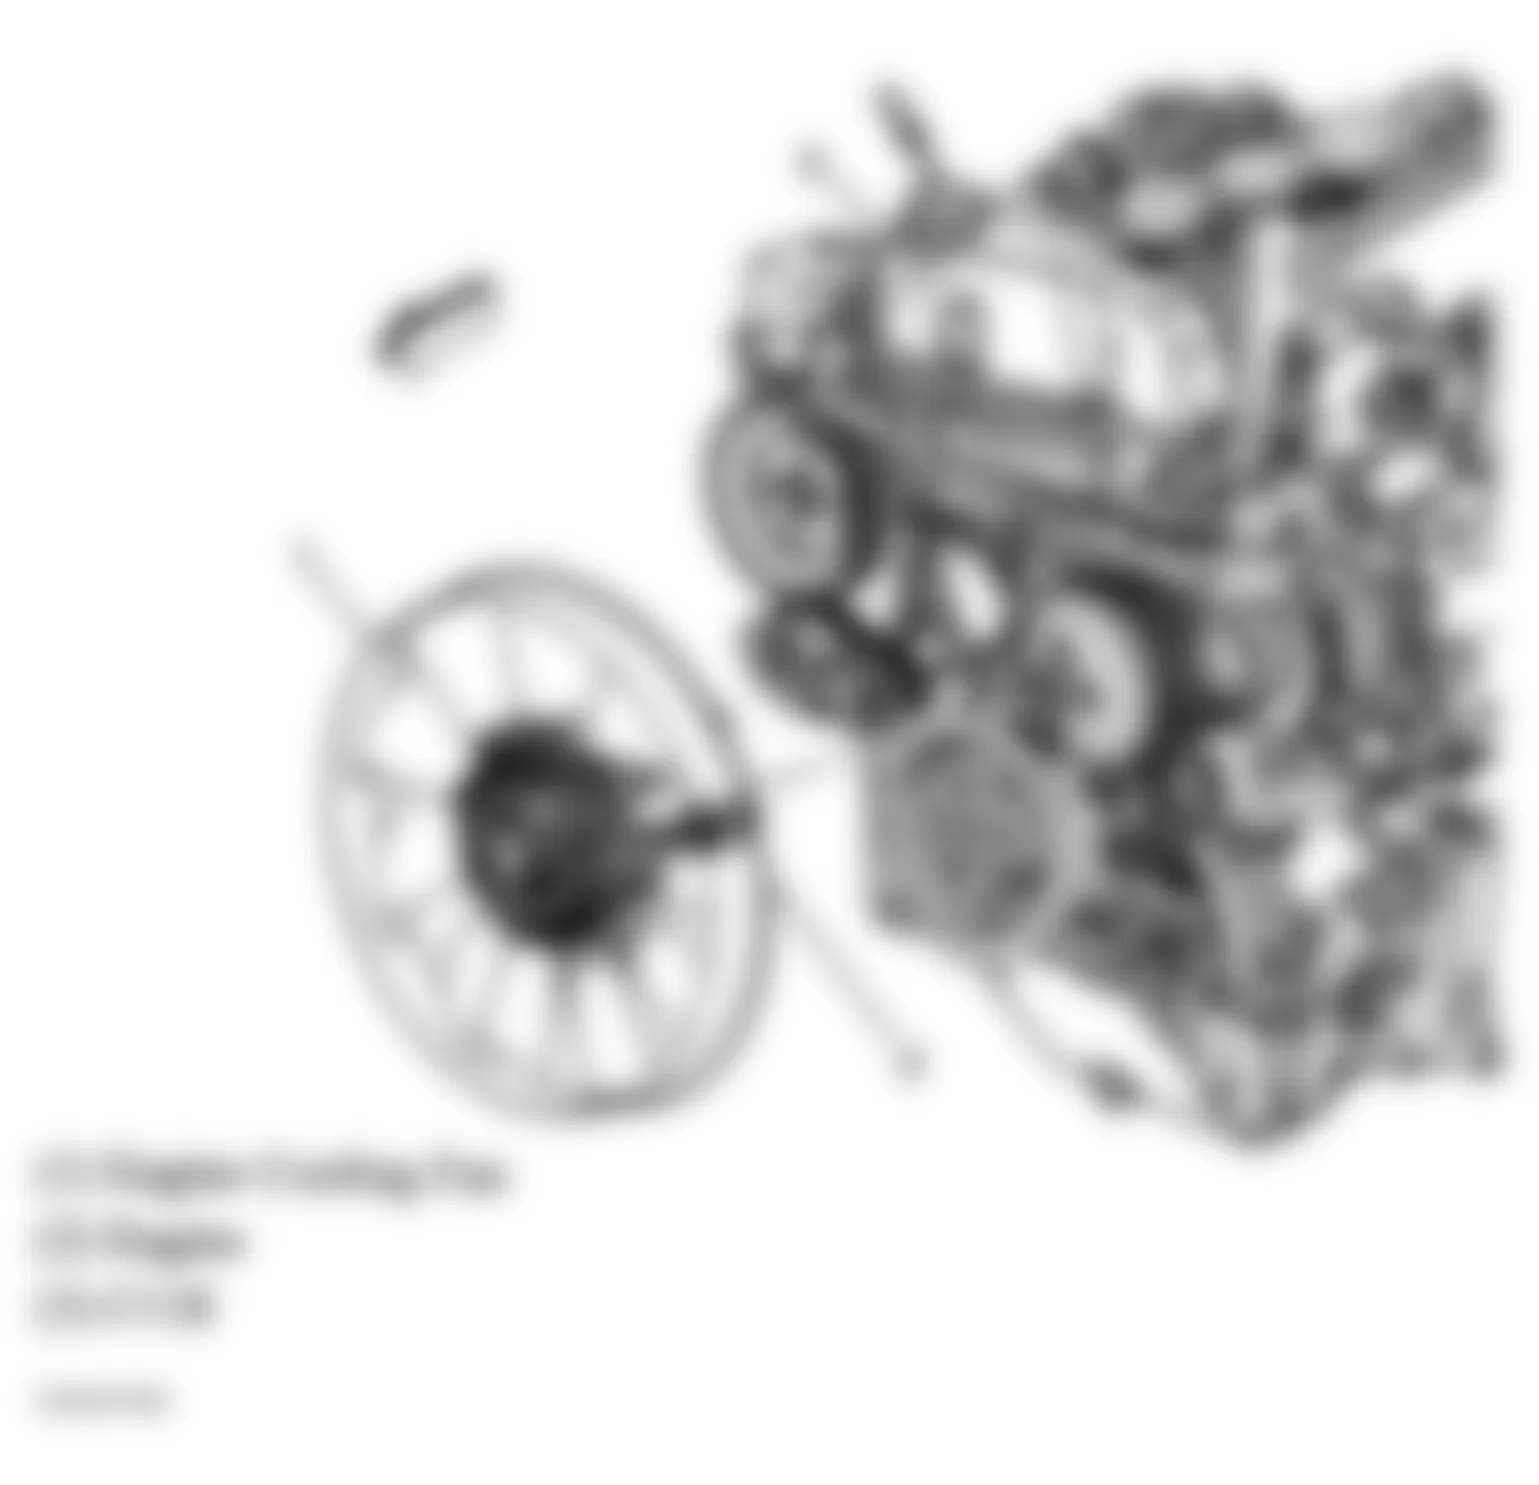 GMC Envoy XL 2005 - Component Locations -  Front Of Engine (4.2L)